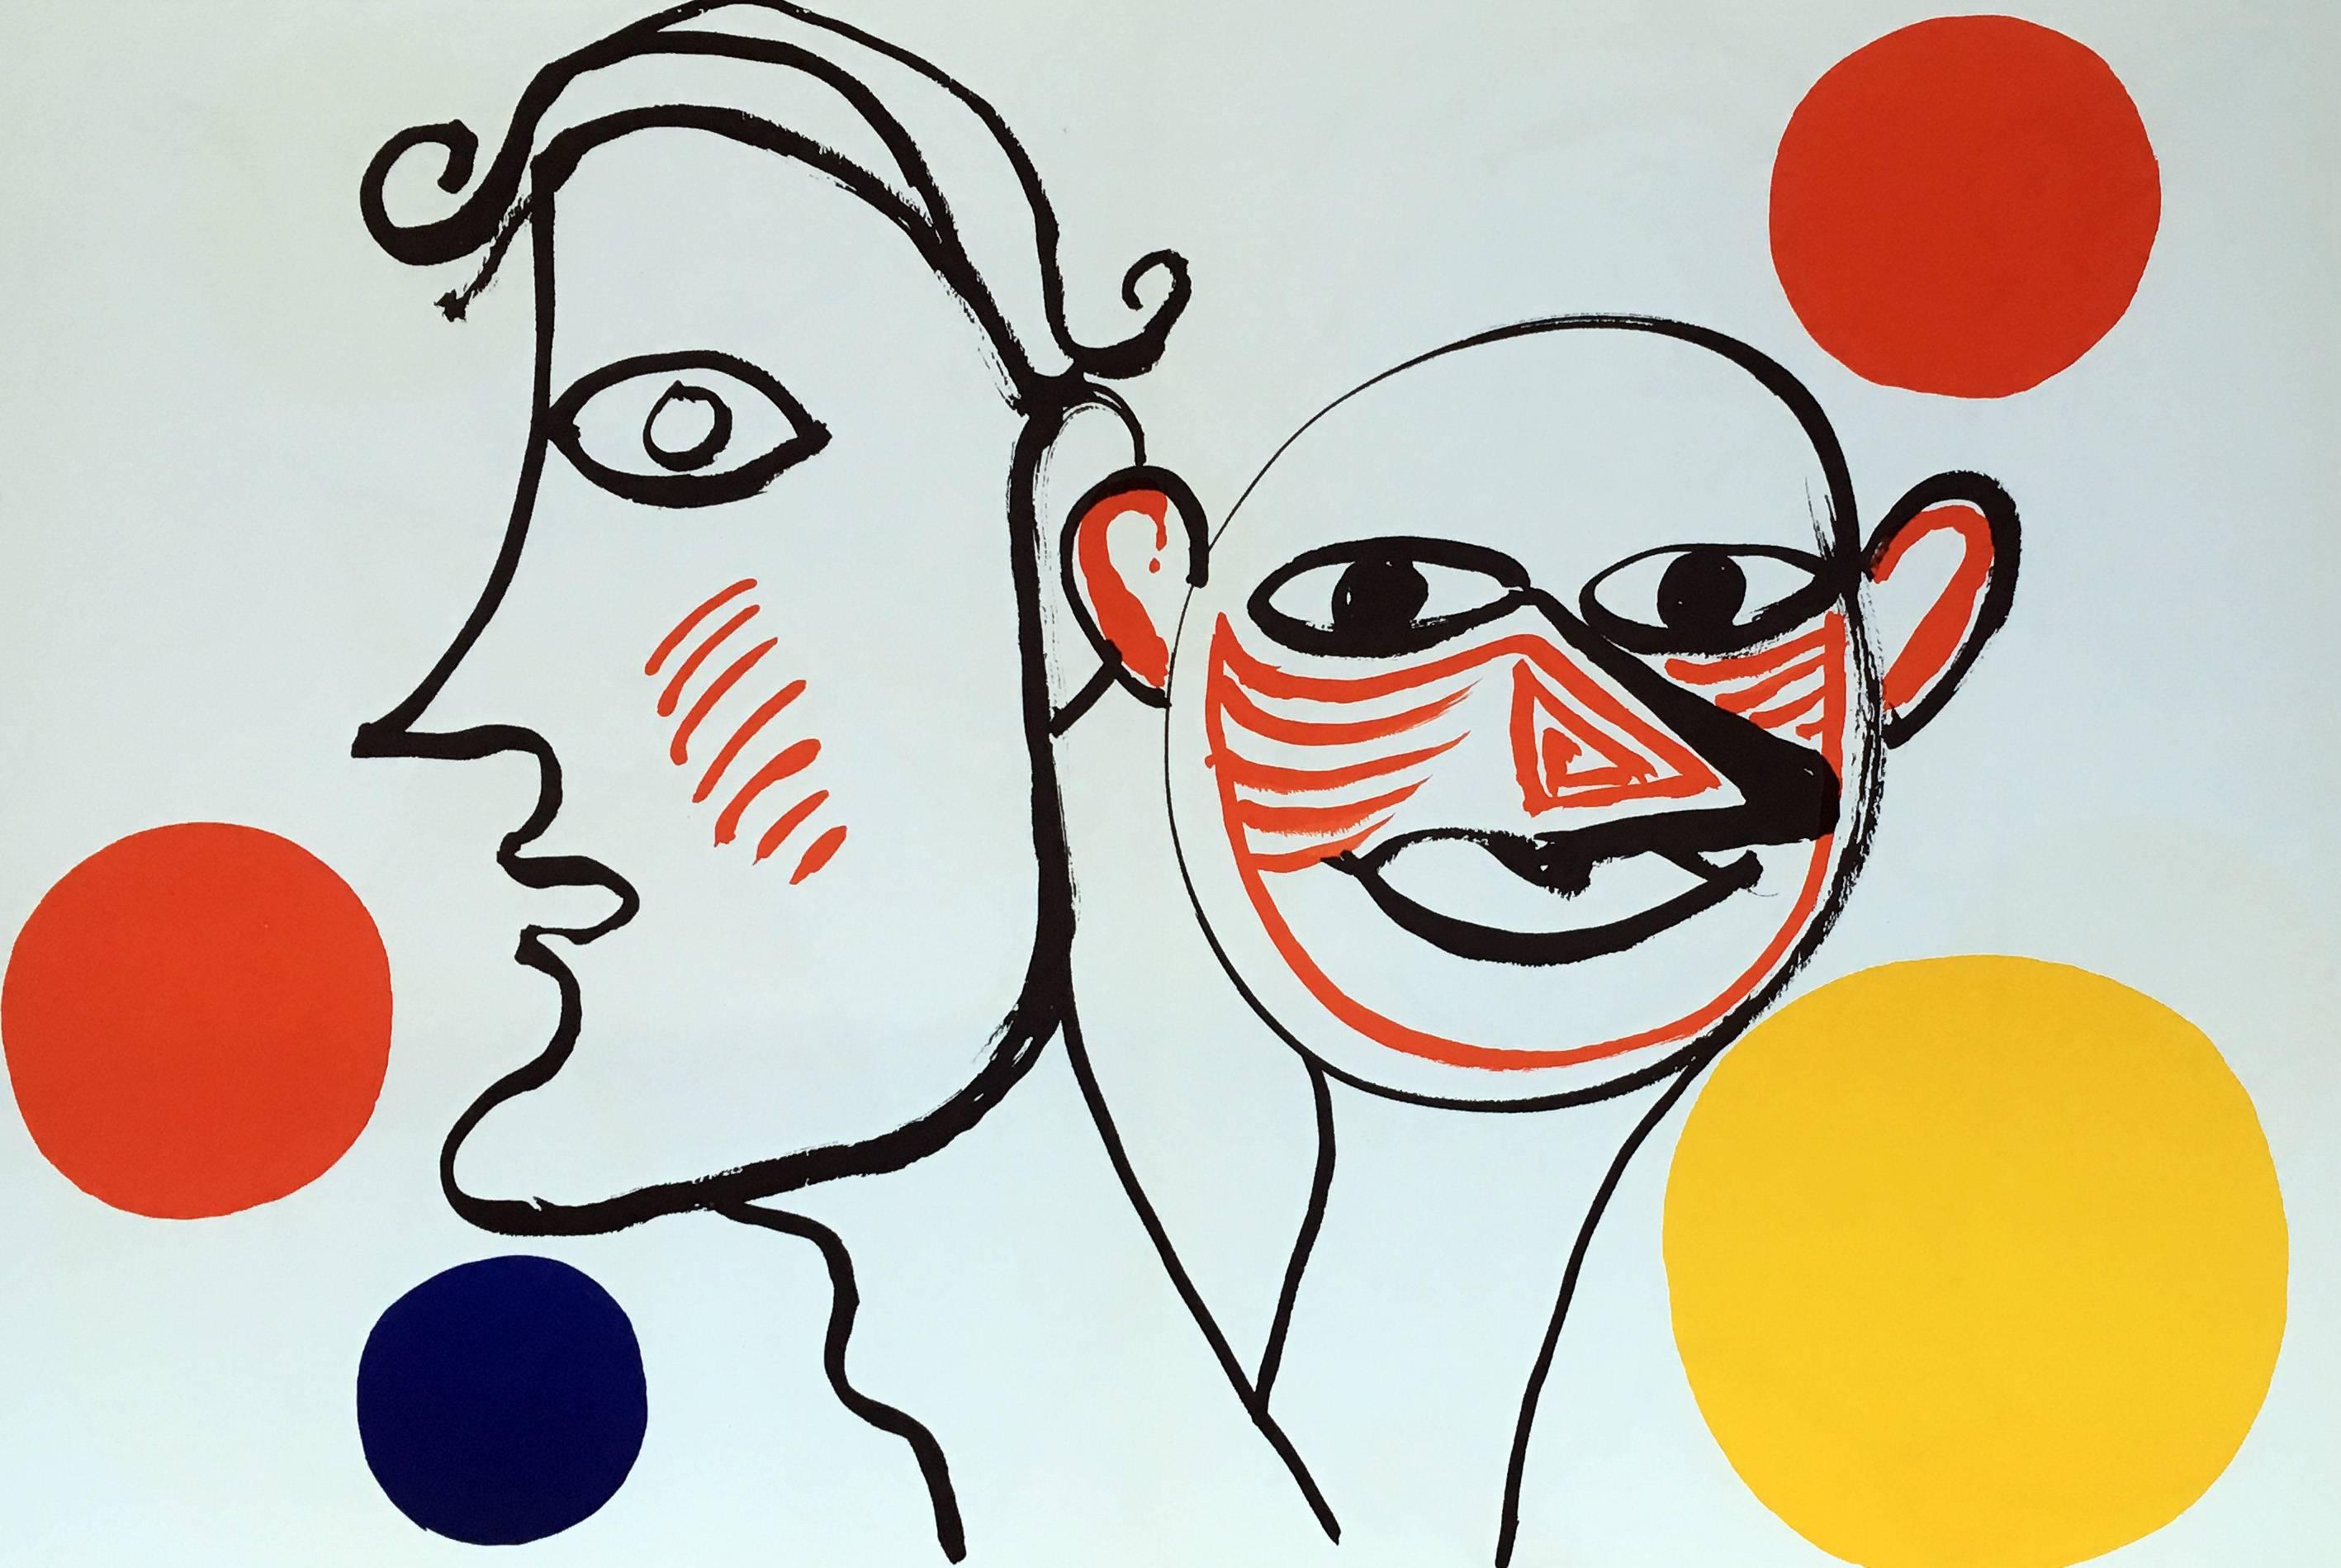 Vintage Alexander Calder Lithograph 
Portfolio: Derriere Le Miroir
Published by: Galerie Maeght, Paris, 1971
Unsigned from an edition of unknown 
Excellent frame piece. Excellent overall quality. 

Lithograph in colors 1971
11 x 15 inches
Minor